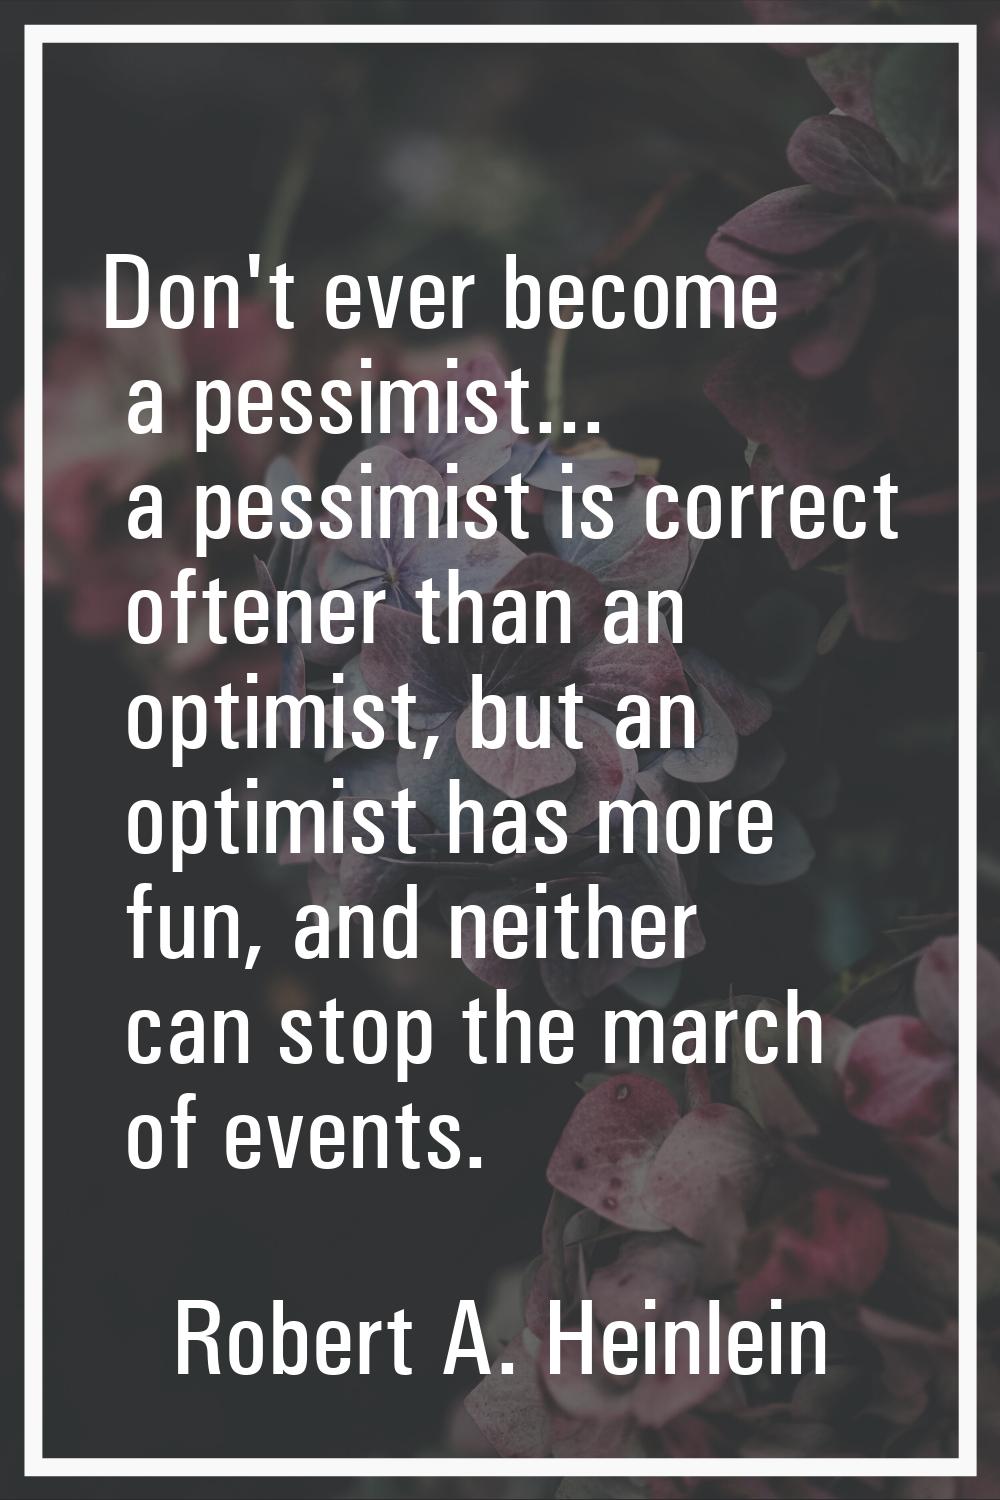 Don't ever become a pessimist... a pessimist is correct oftener than an optimist, but an optimist h